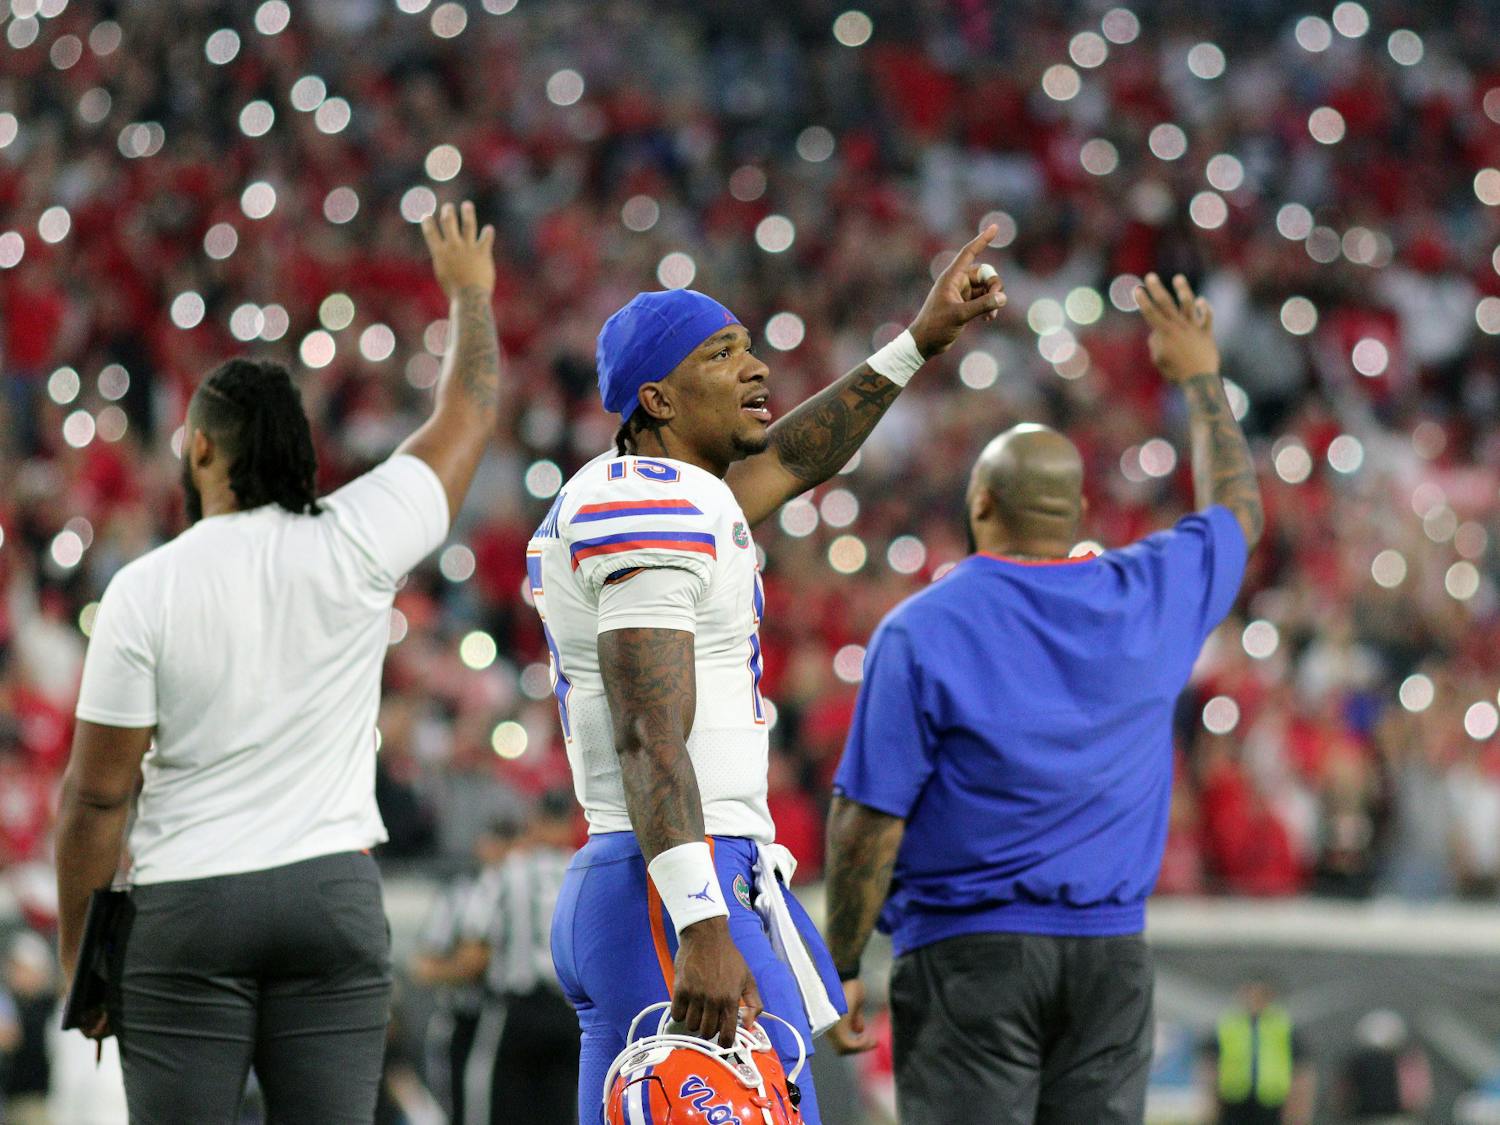 UF quarterback Anthony Richardson looks to the stands at the end of the third quarter of the Florida-Georgia game Saturday, Oct. 29, 2022. 